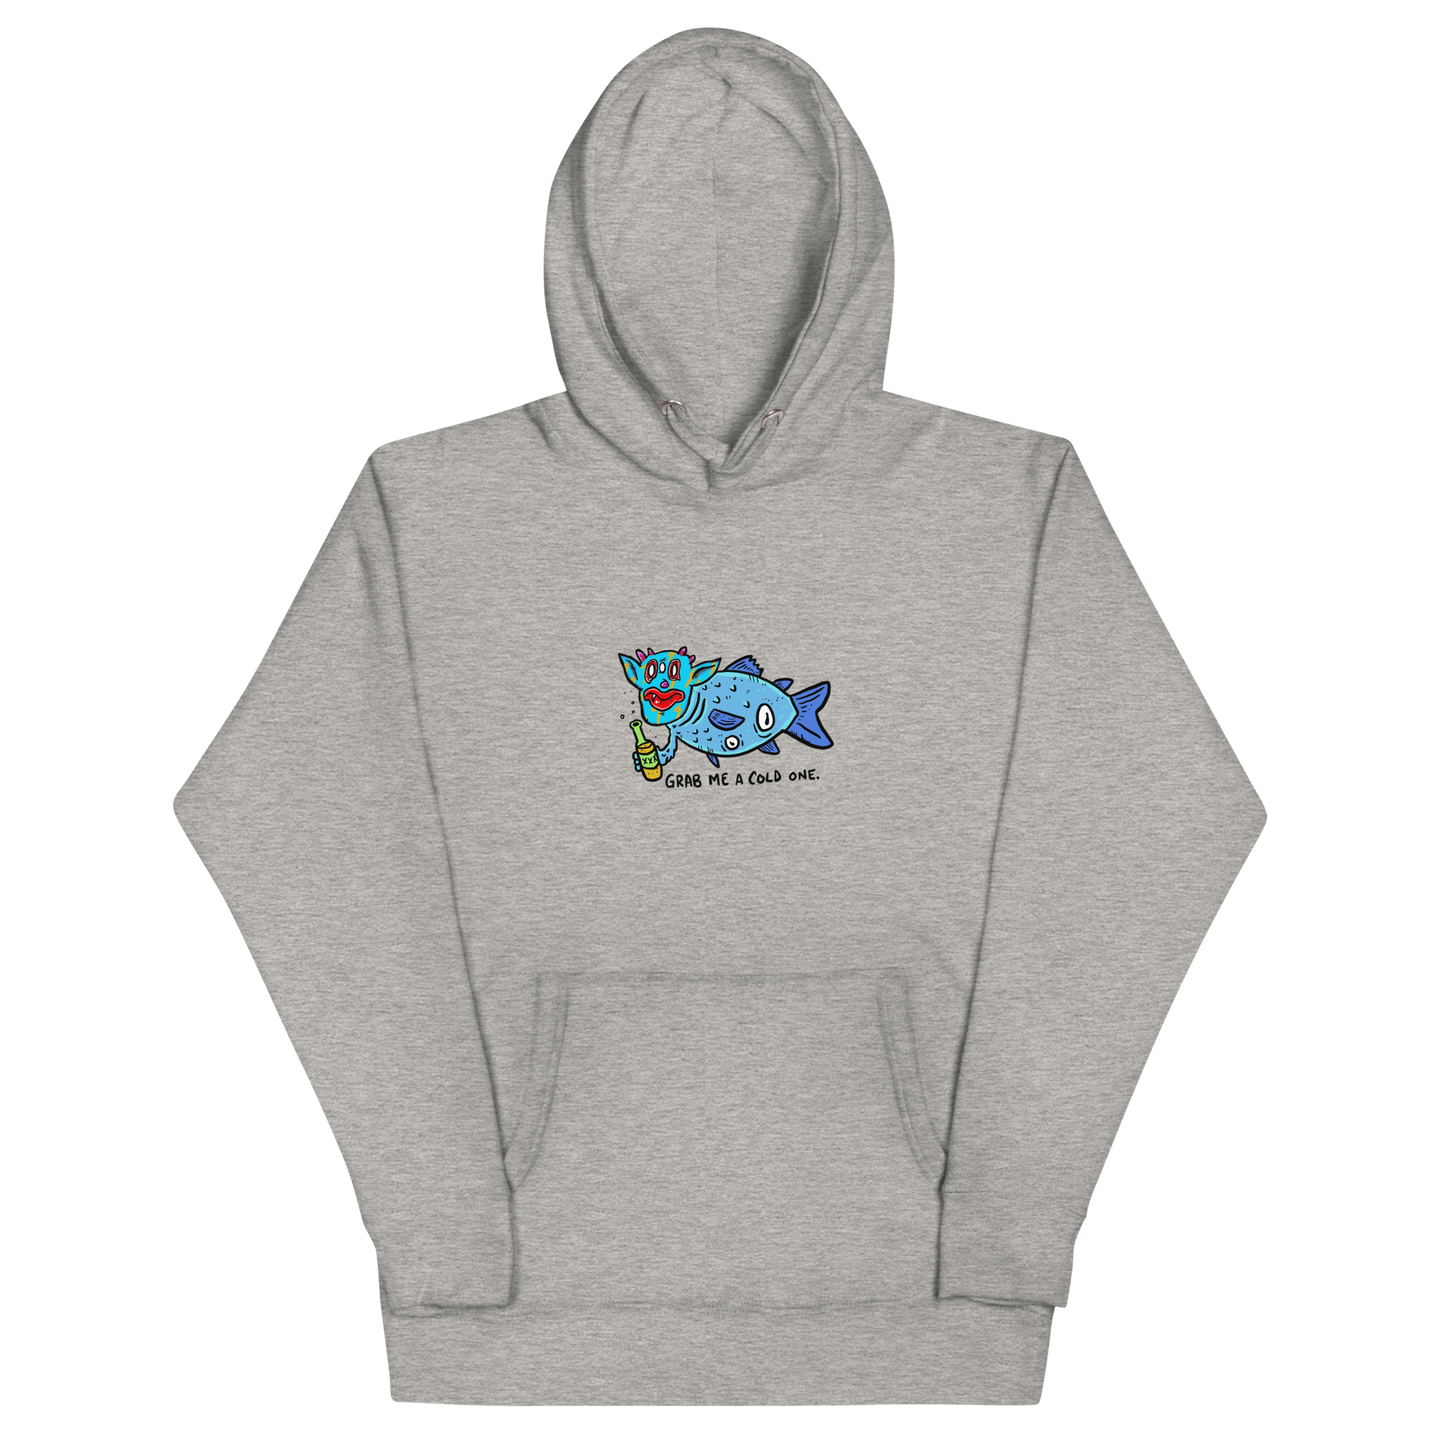 Pass Me a Cold One Hoodie